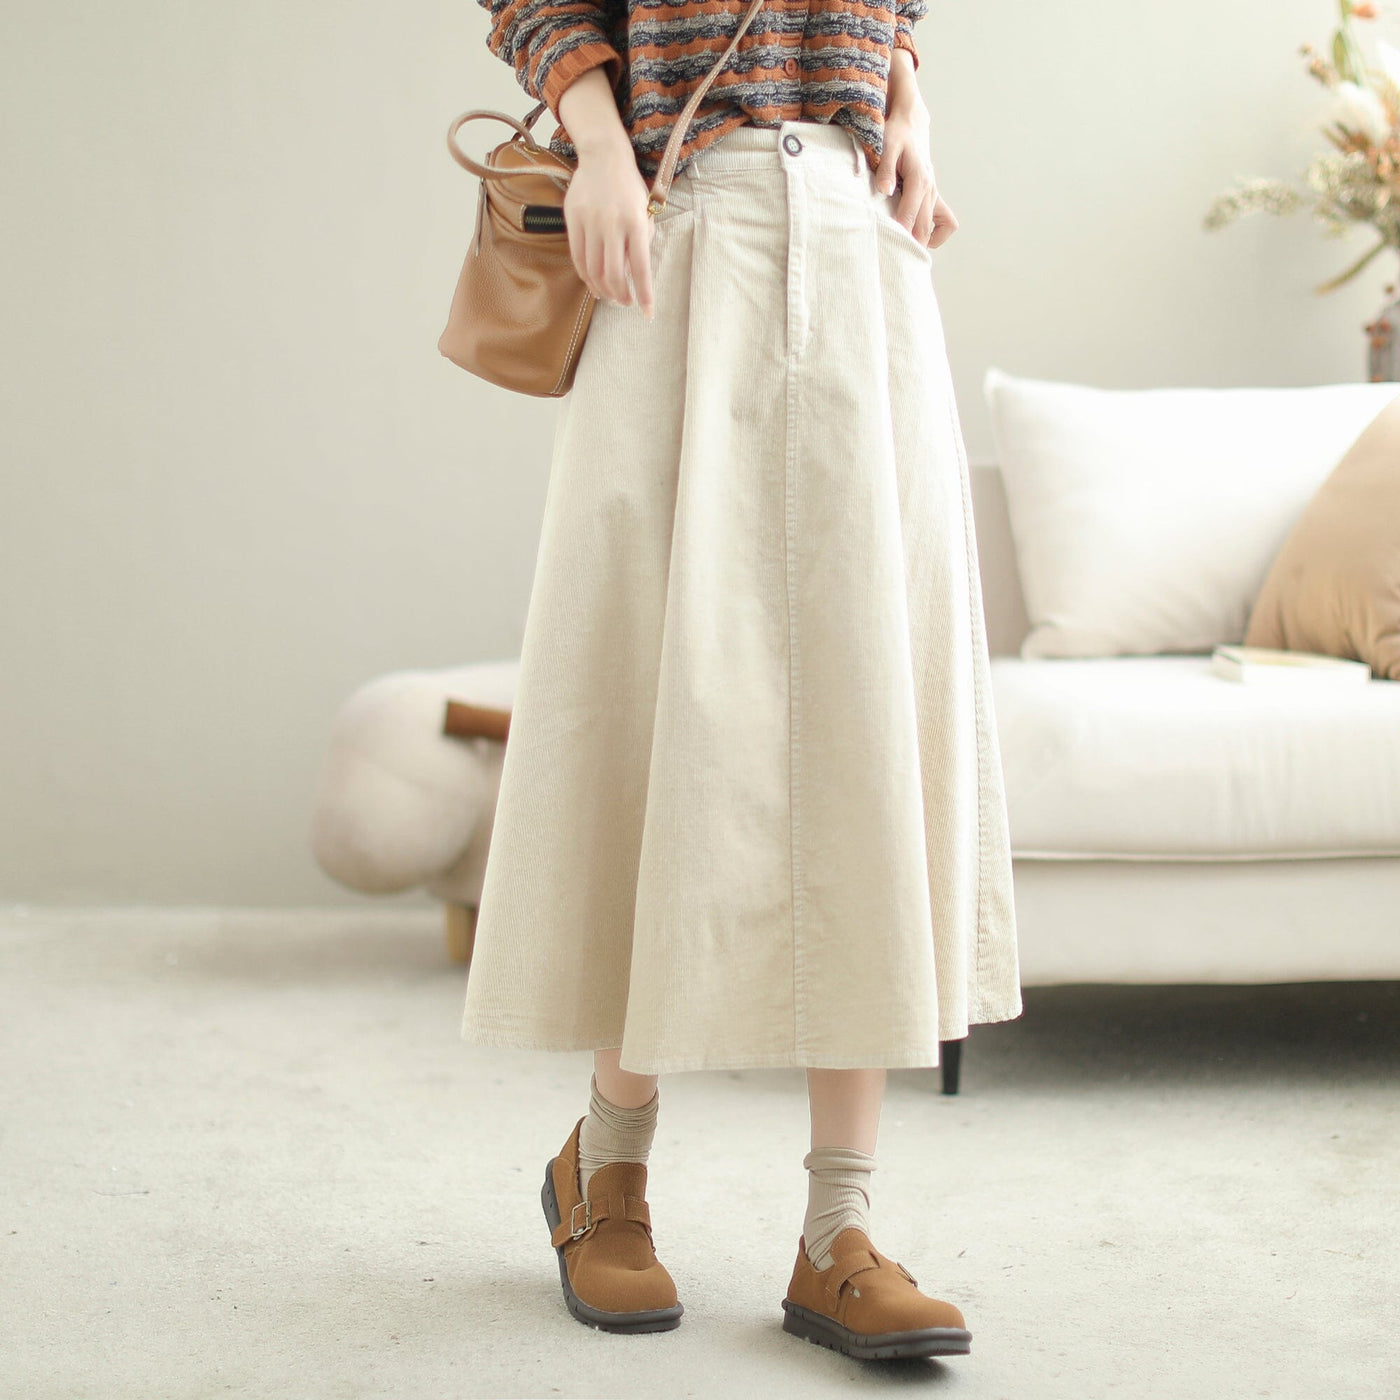 Women Autumn Solid Corduroy Casual A-Line Skirt